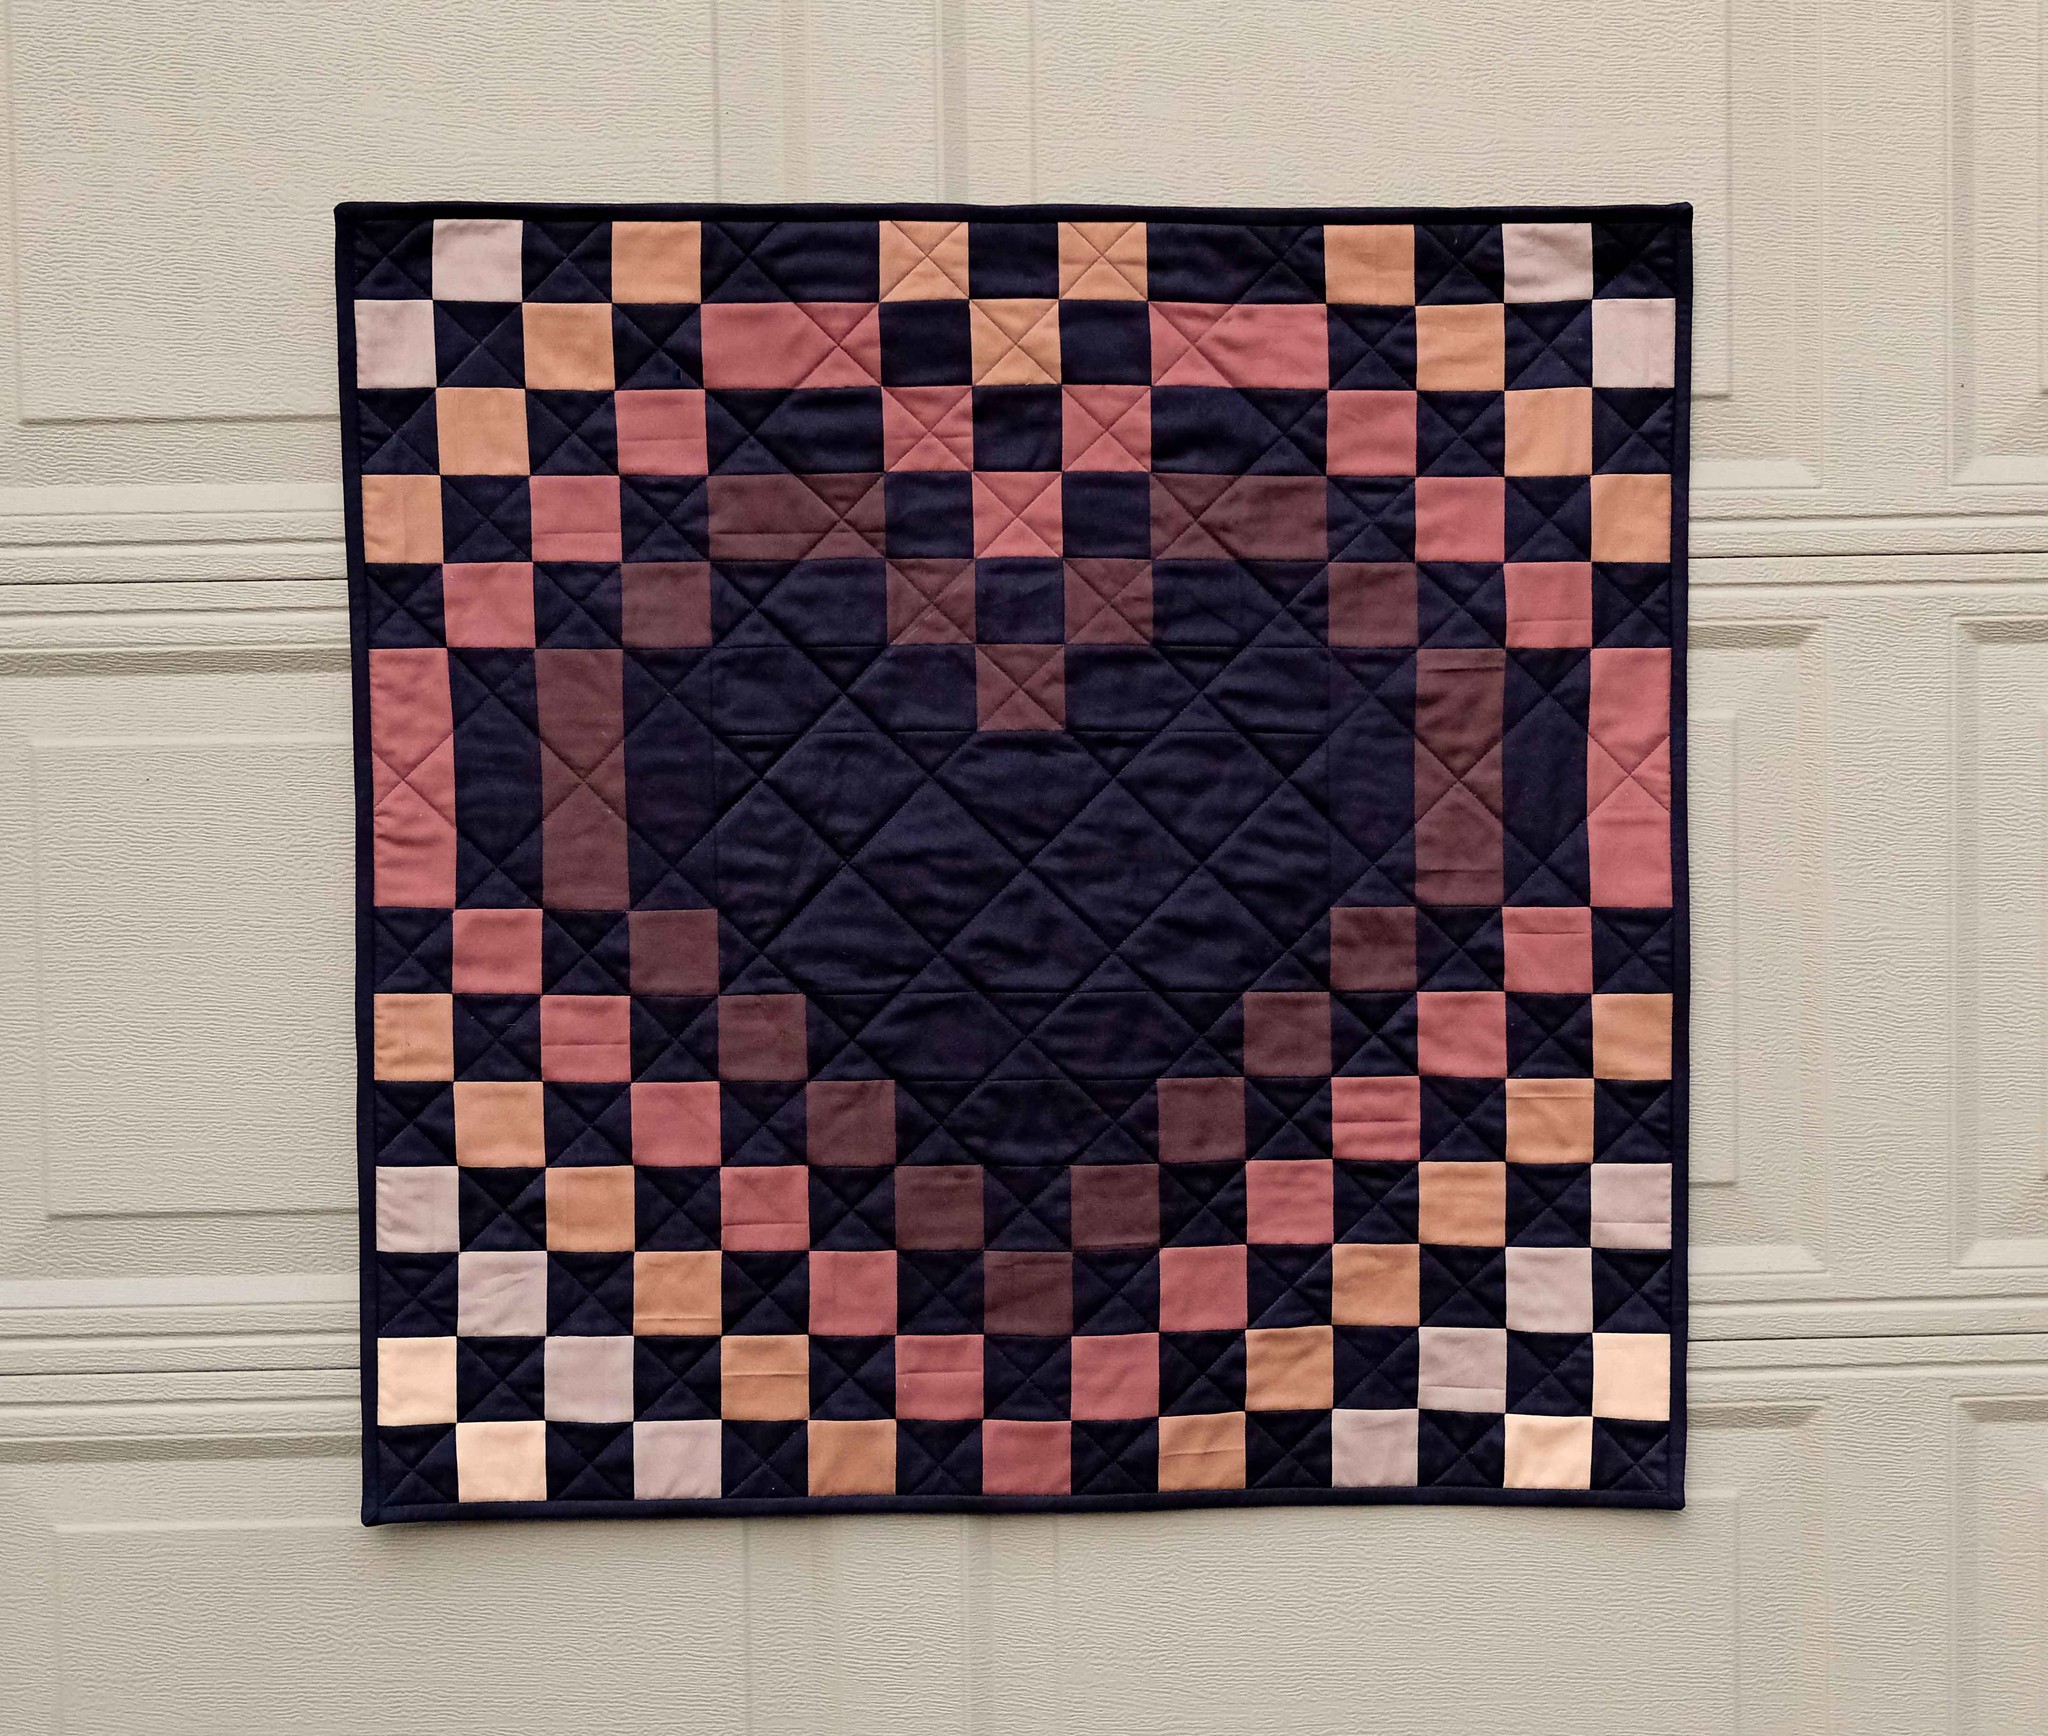 Black Lives Matter Wall Quilt Pattern - Kitchen Table Quilting